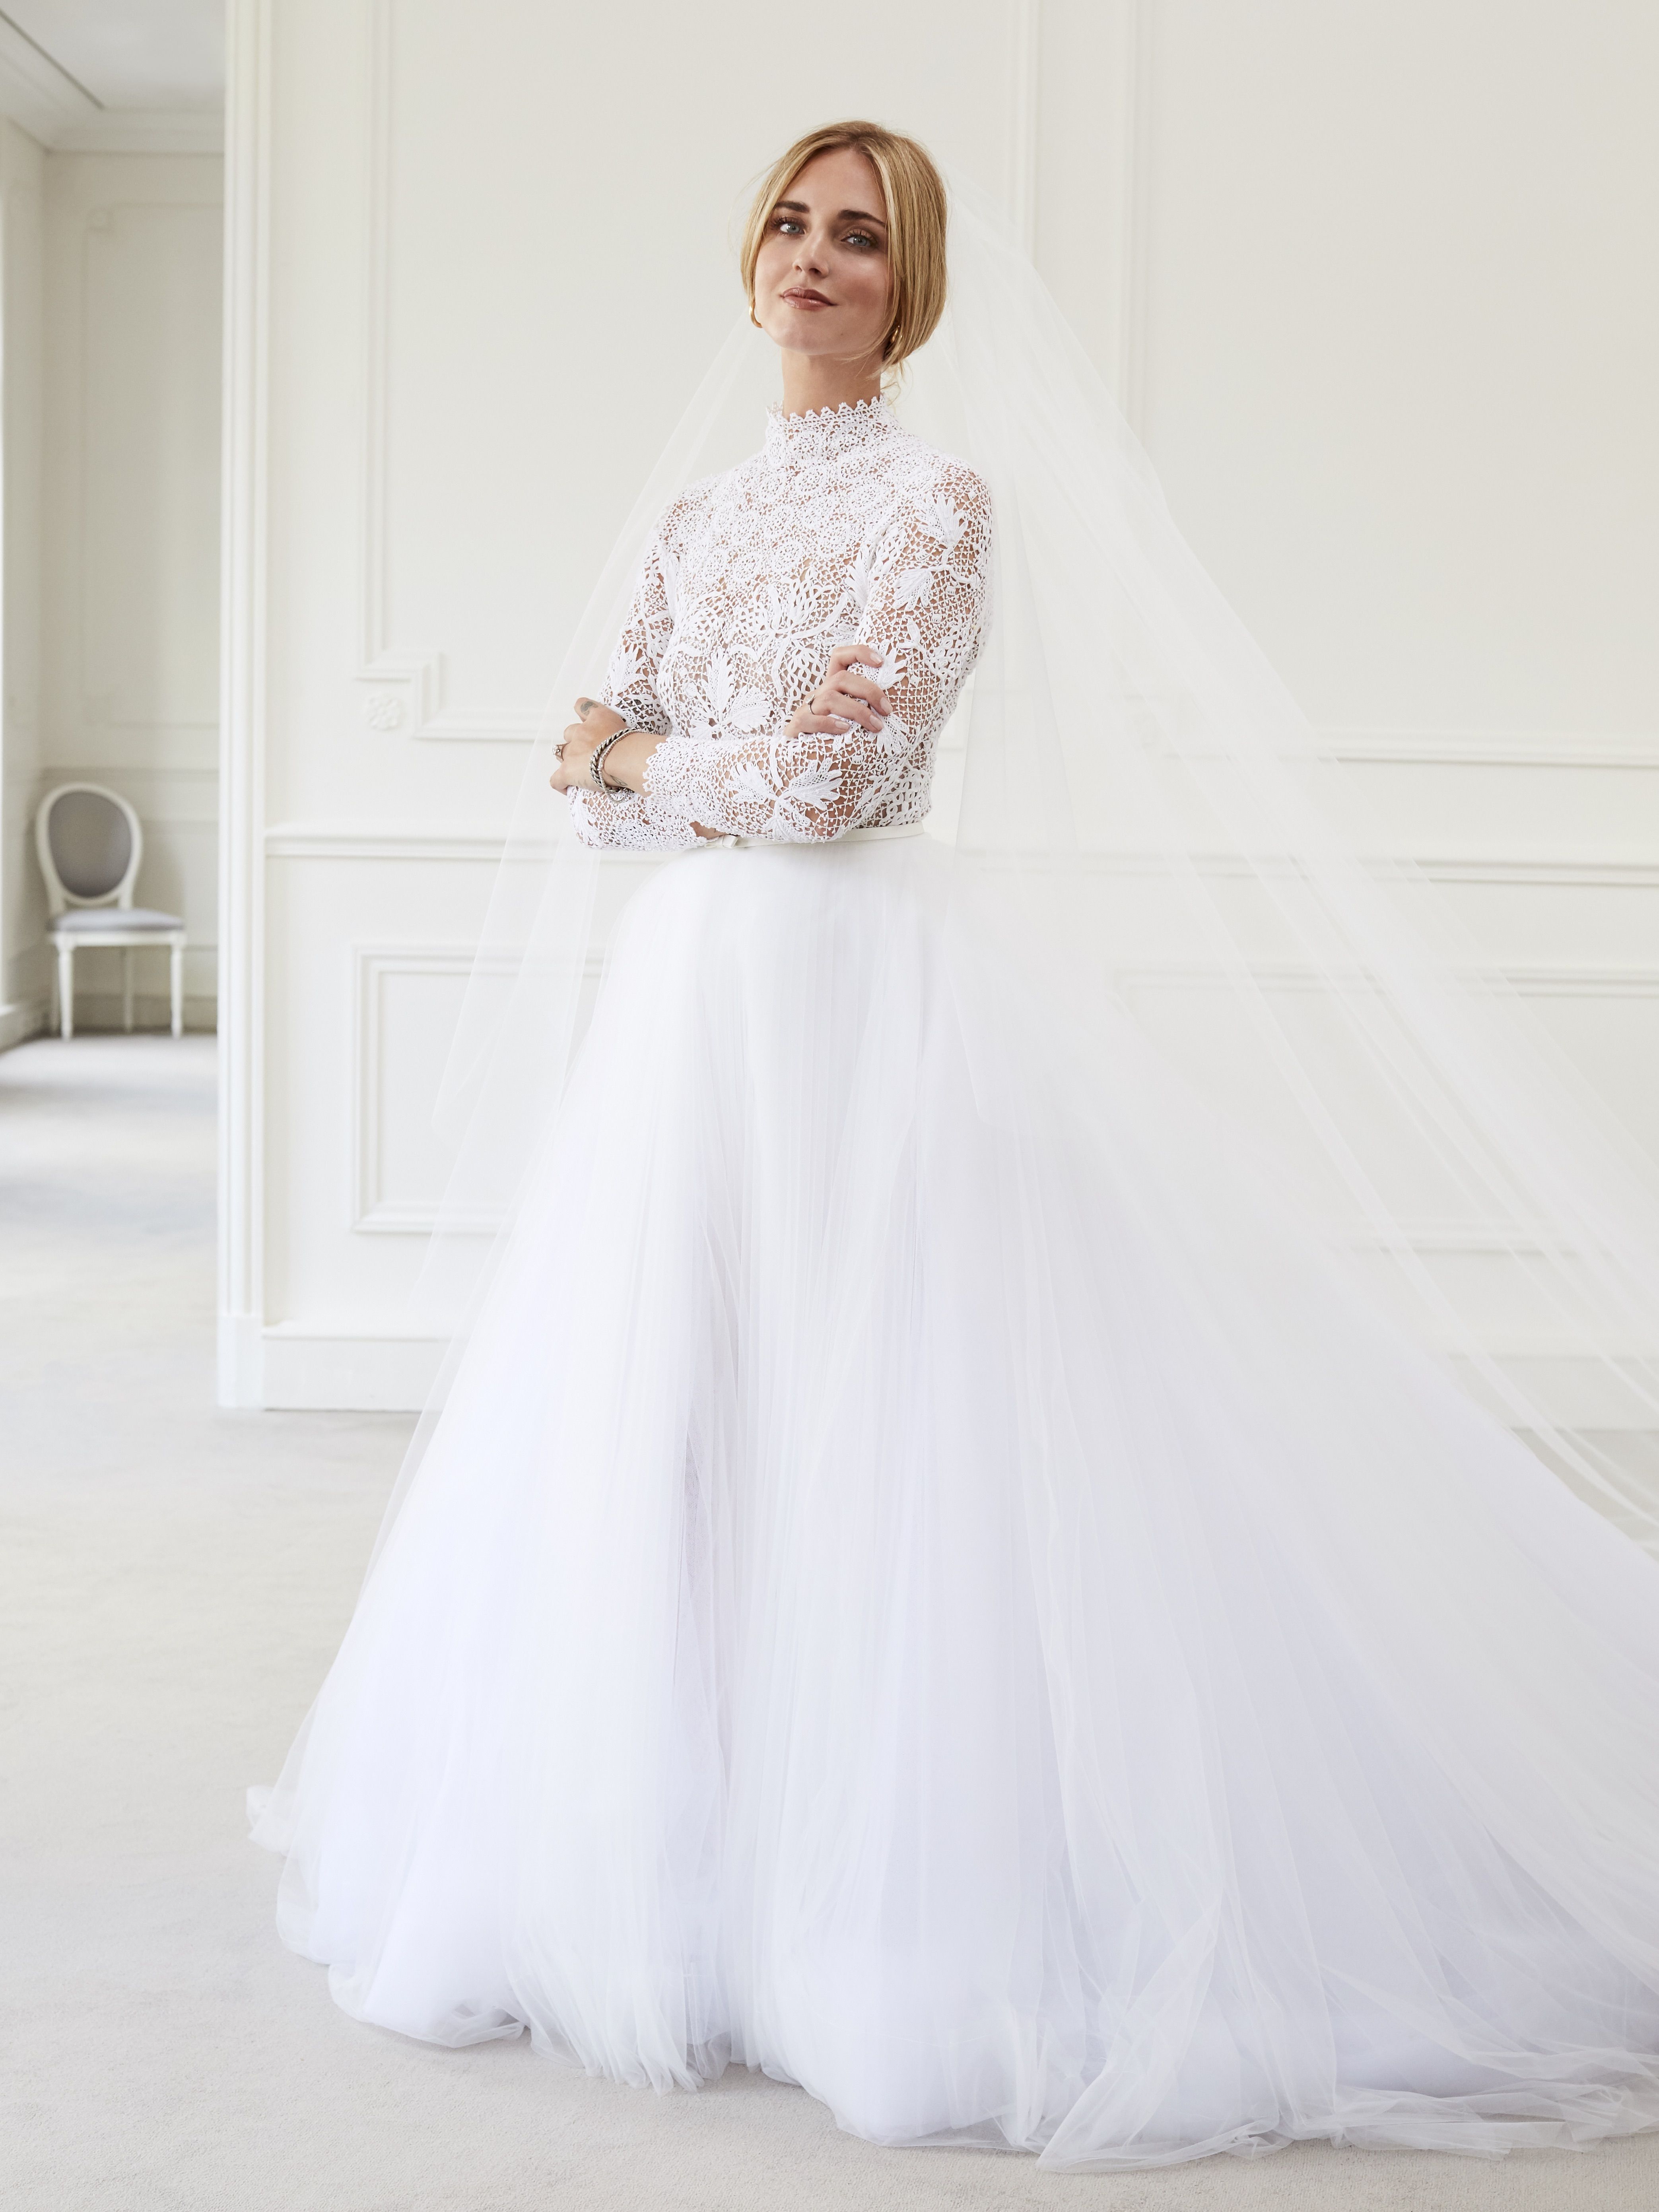 Video: Chiara Ferragni sees her Dior wedding dress for the first time